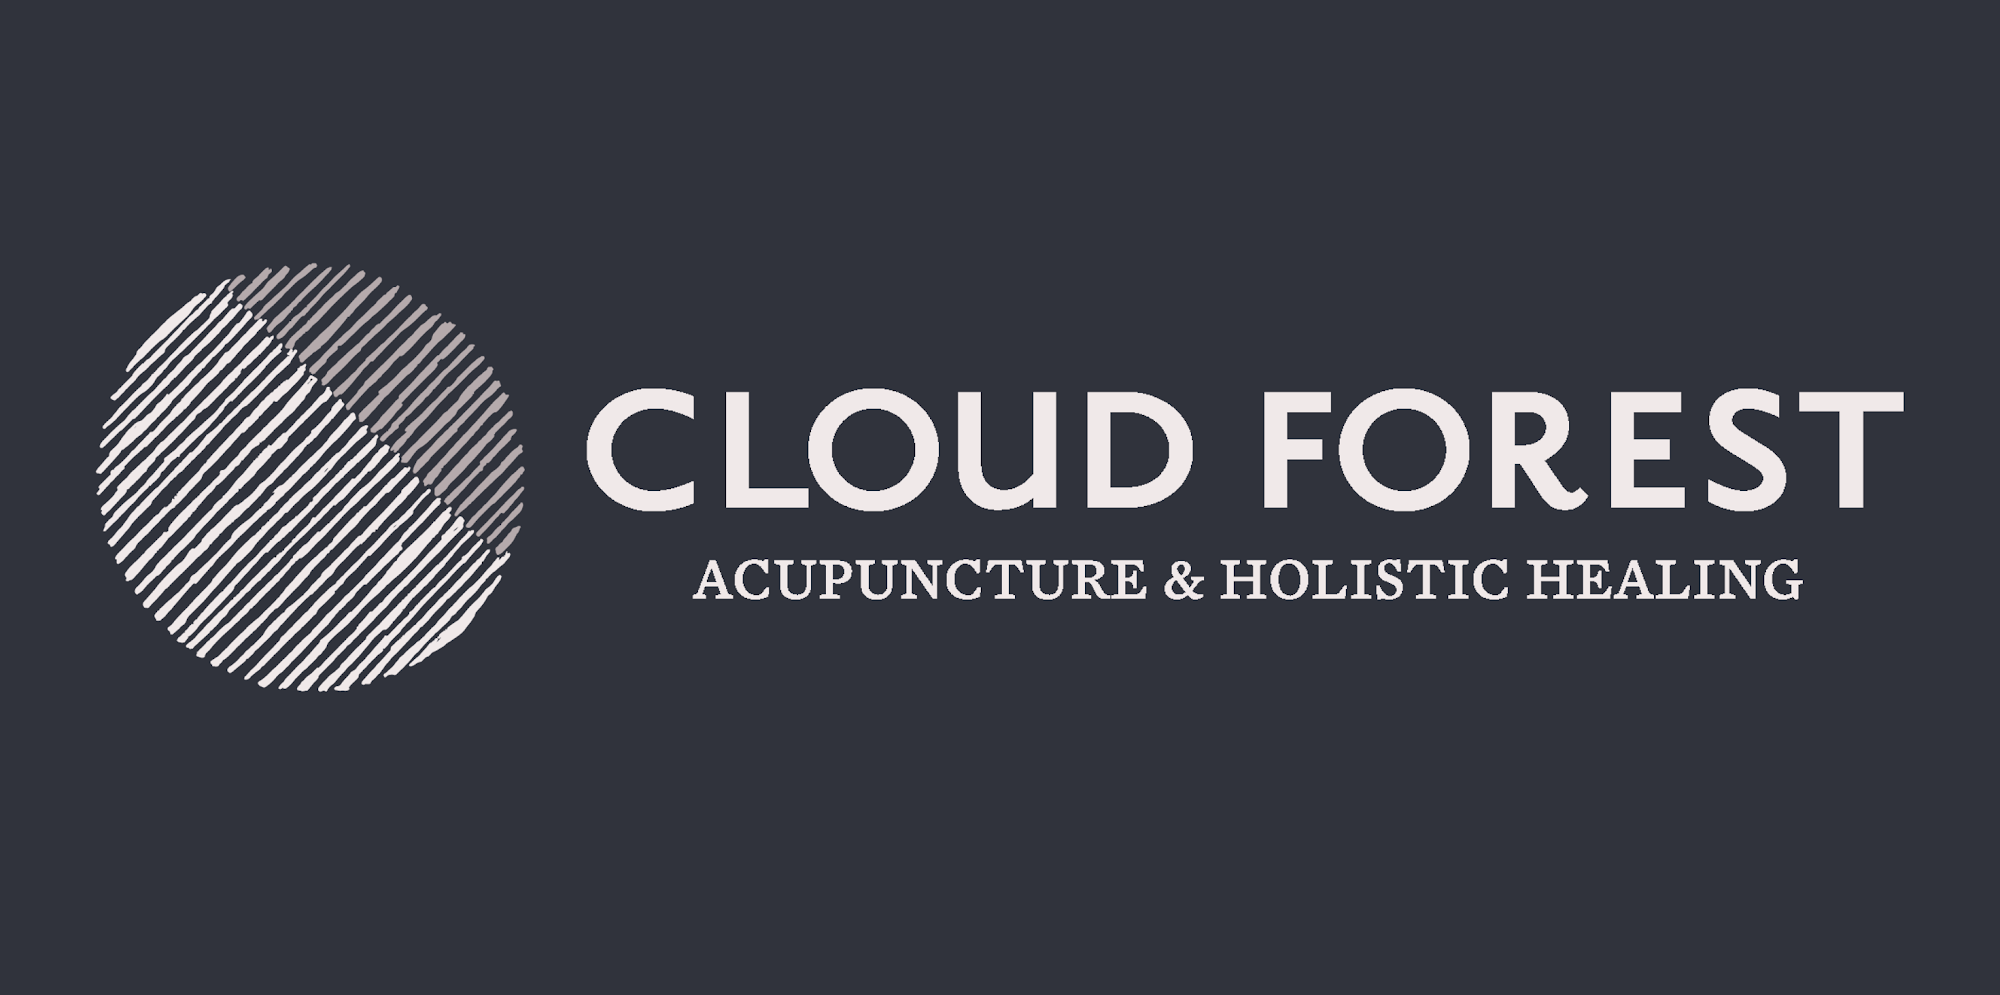 Cloud Forest Acupuncture & Holistic Healing